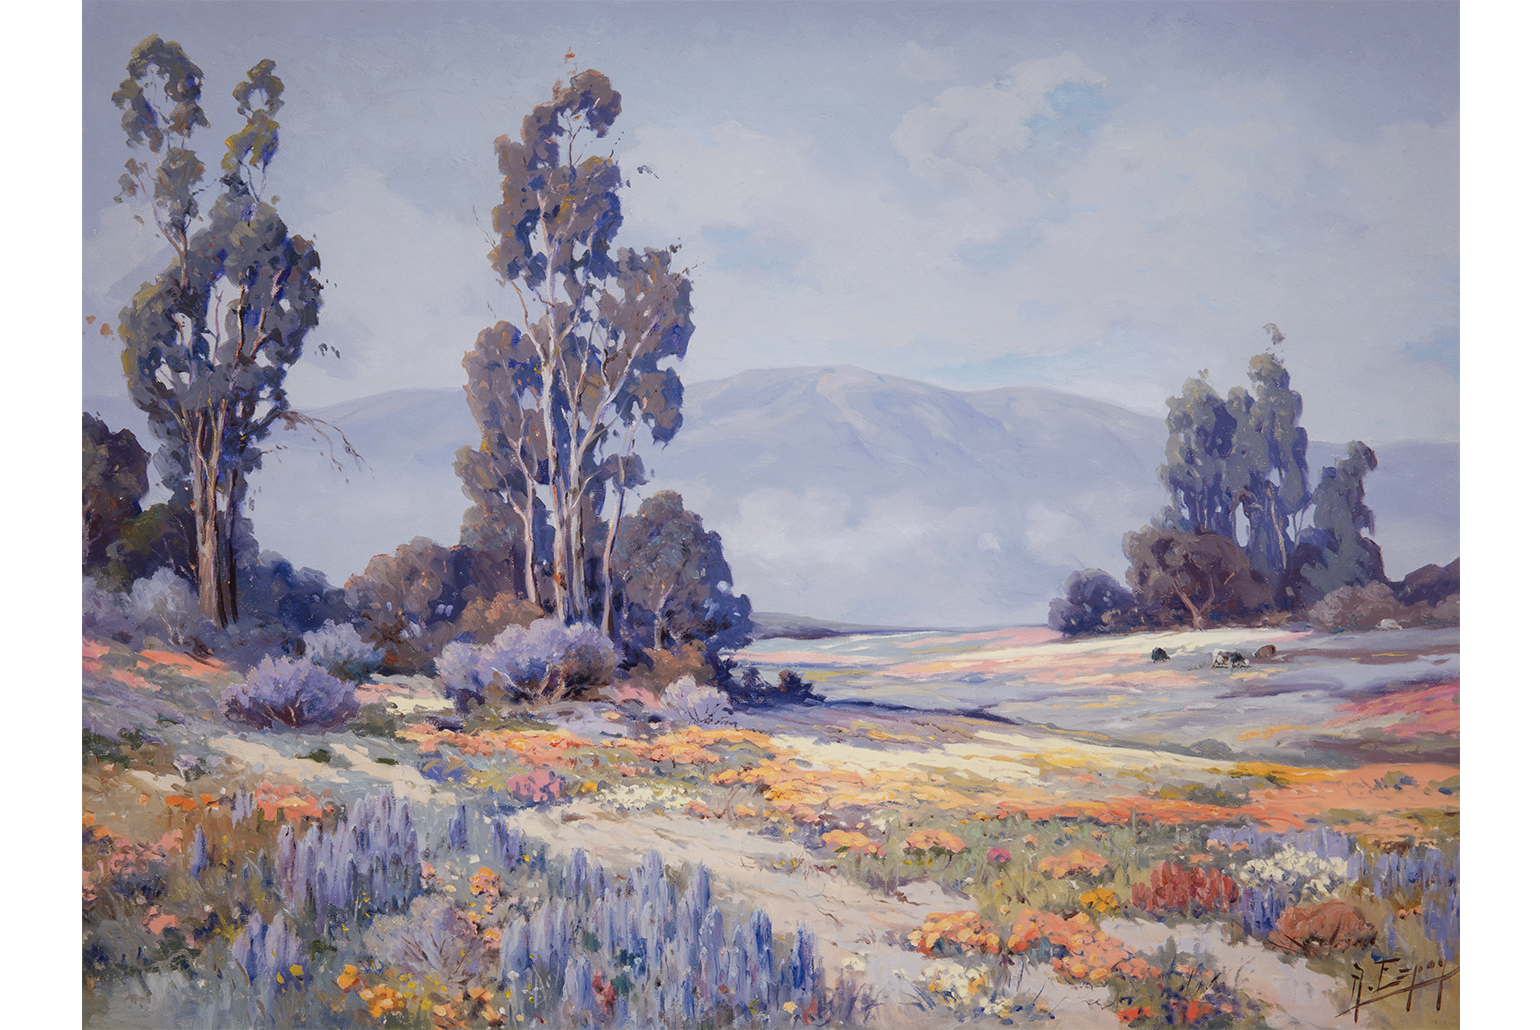 Angel Espoy, Untitled (Poppies, Lupines and Cows), after 1914, Oil on canvas, 30 x 40 in. UCI Jack and Shanaz Langson Institute and Museum of California Art, Gift of The Irvine Museum